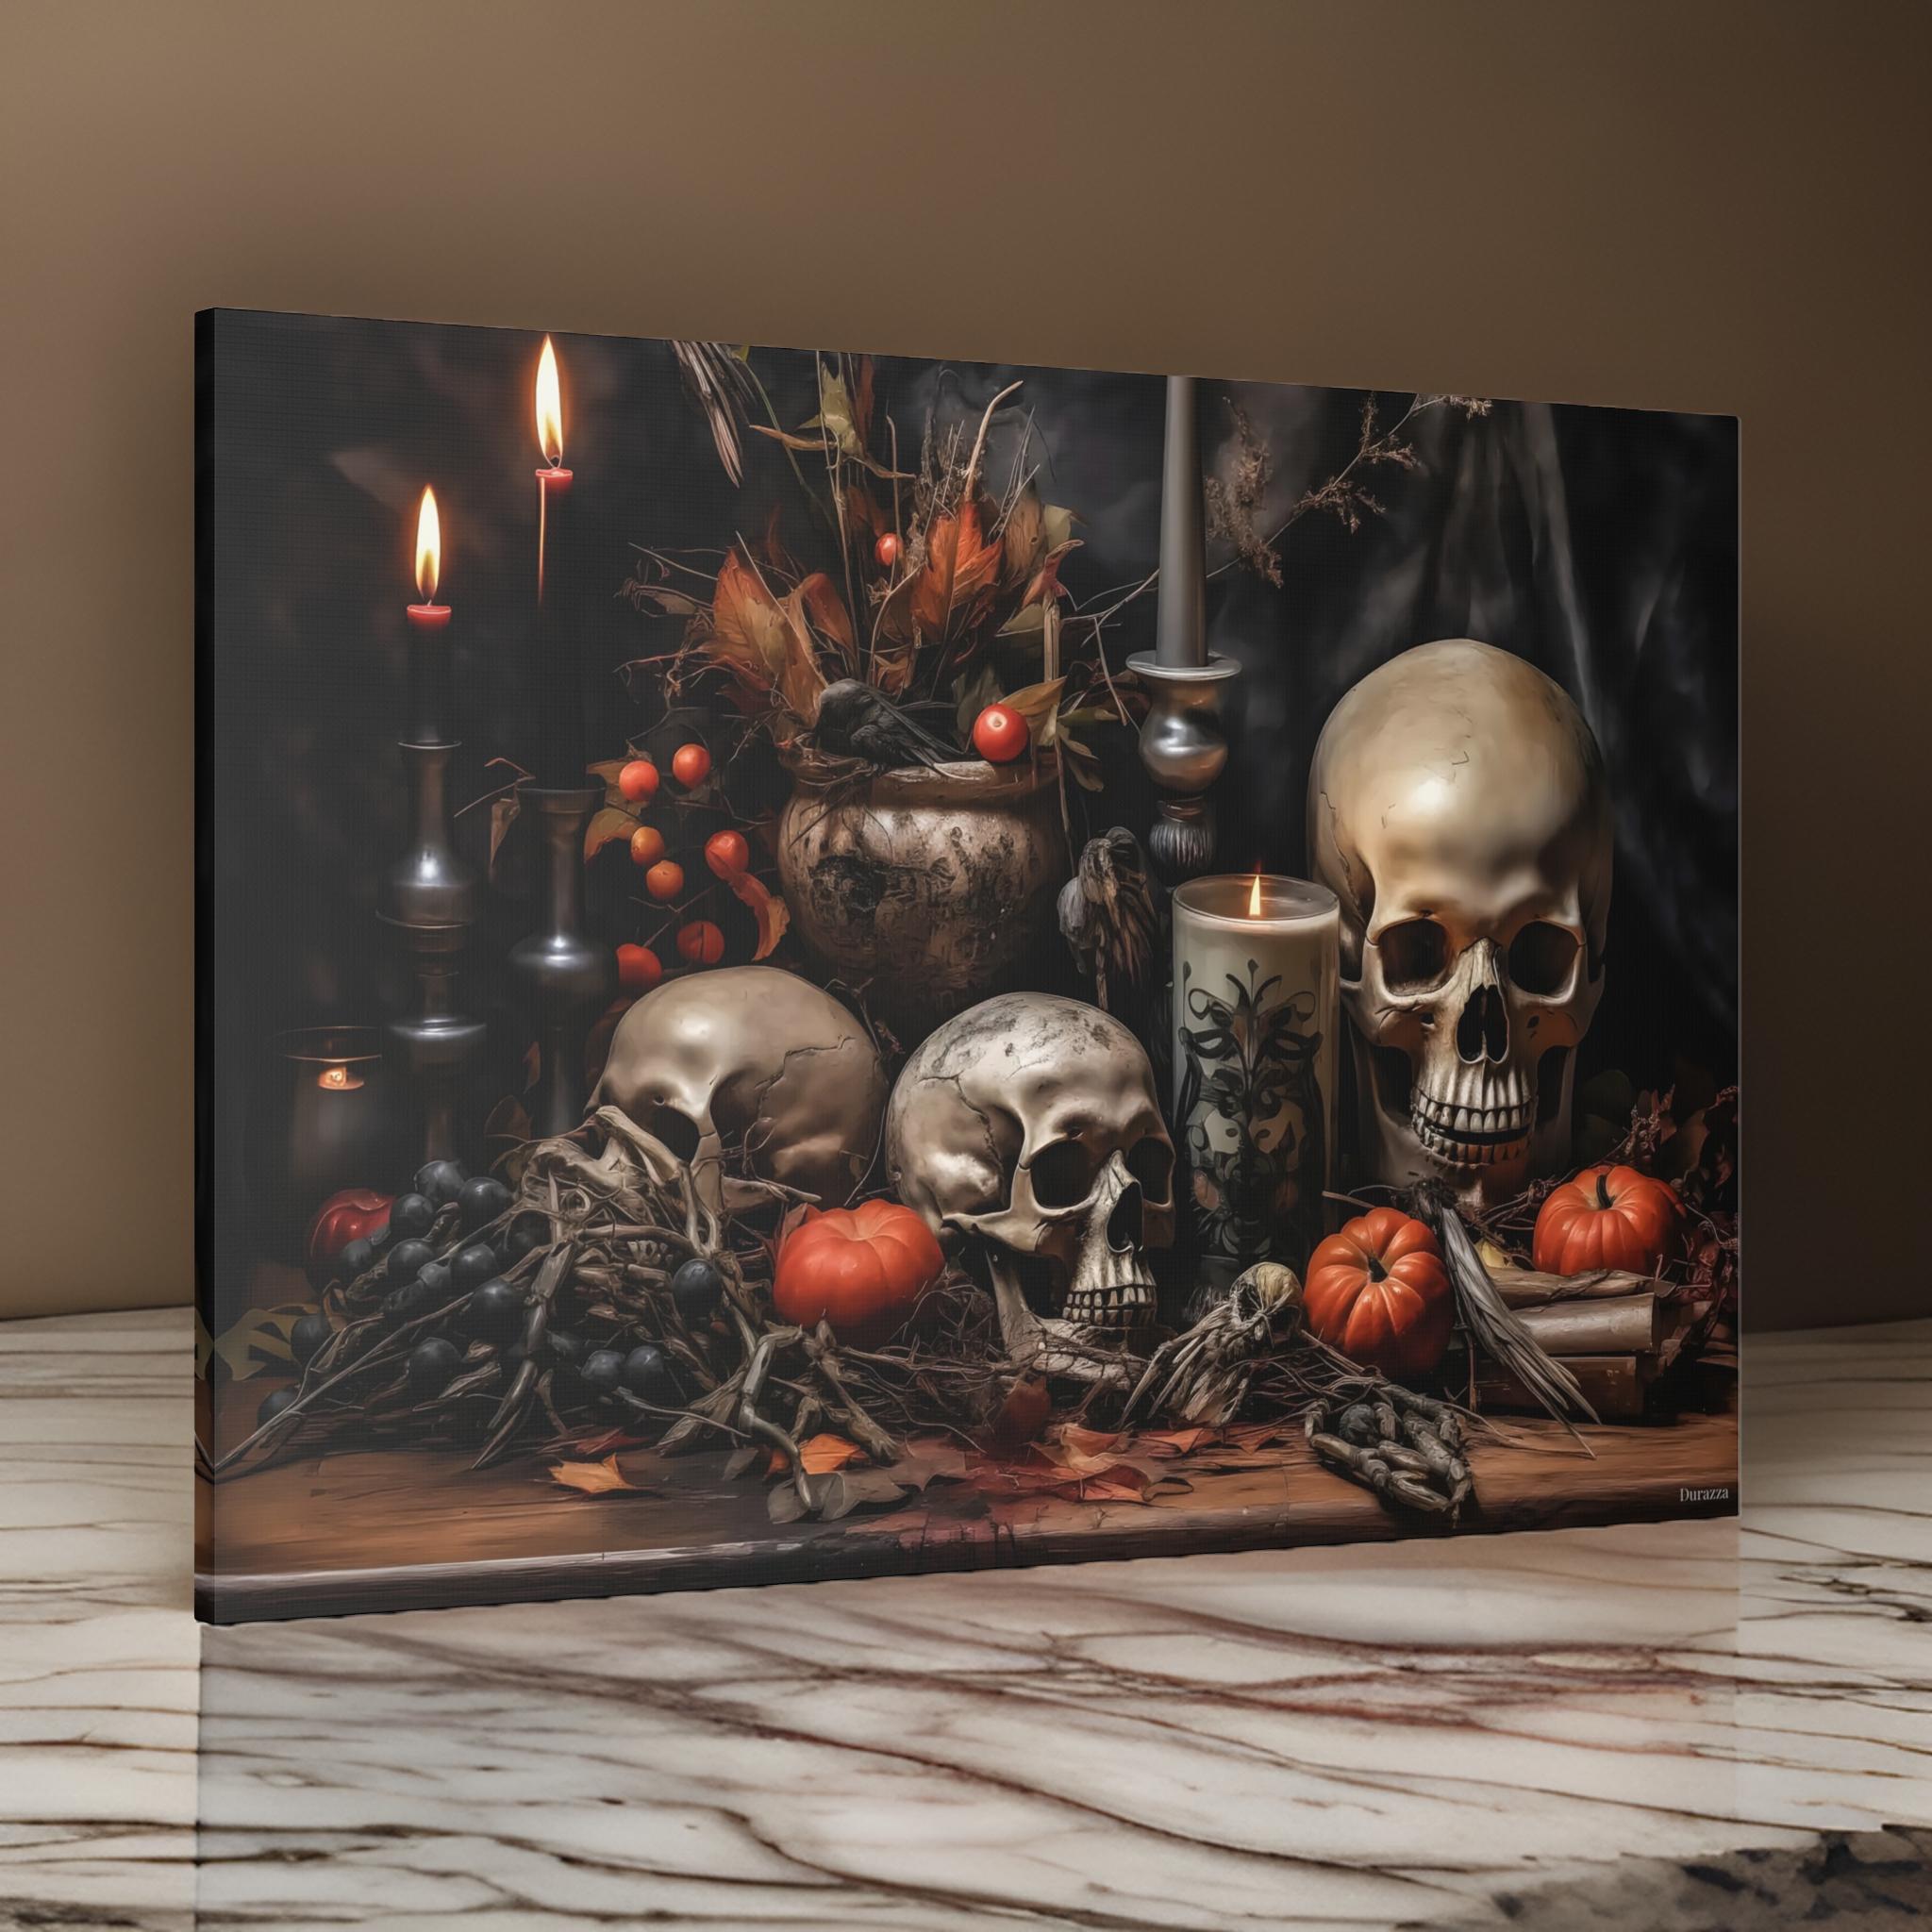 Candlelight and Skulls Wall Art: Gothic Home Decor